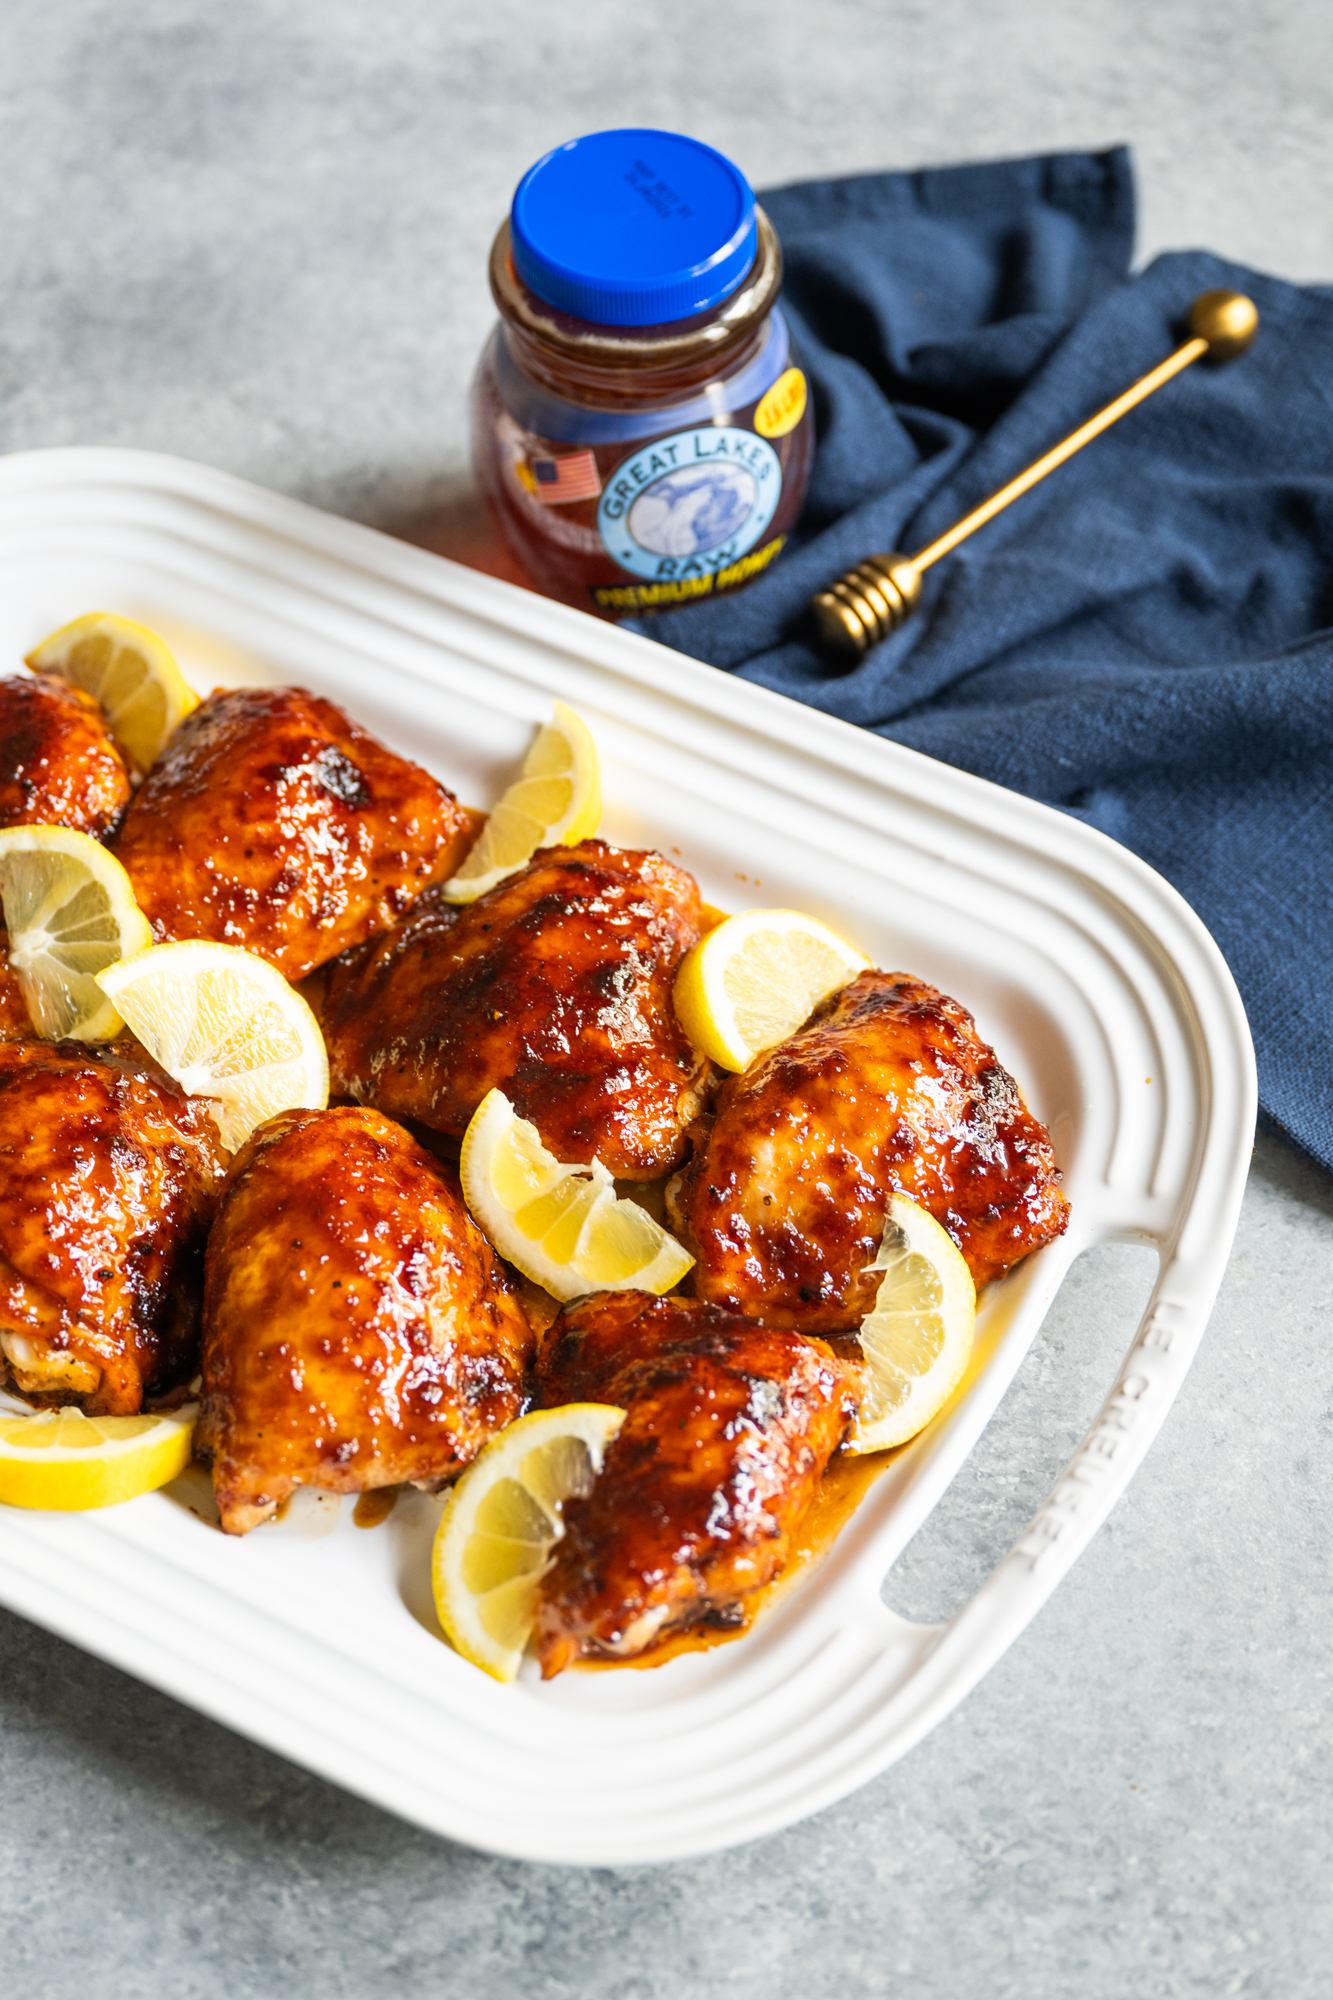 Honey and soy glazed chicken thighs for the National Honey Board